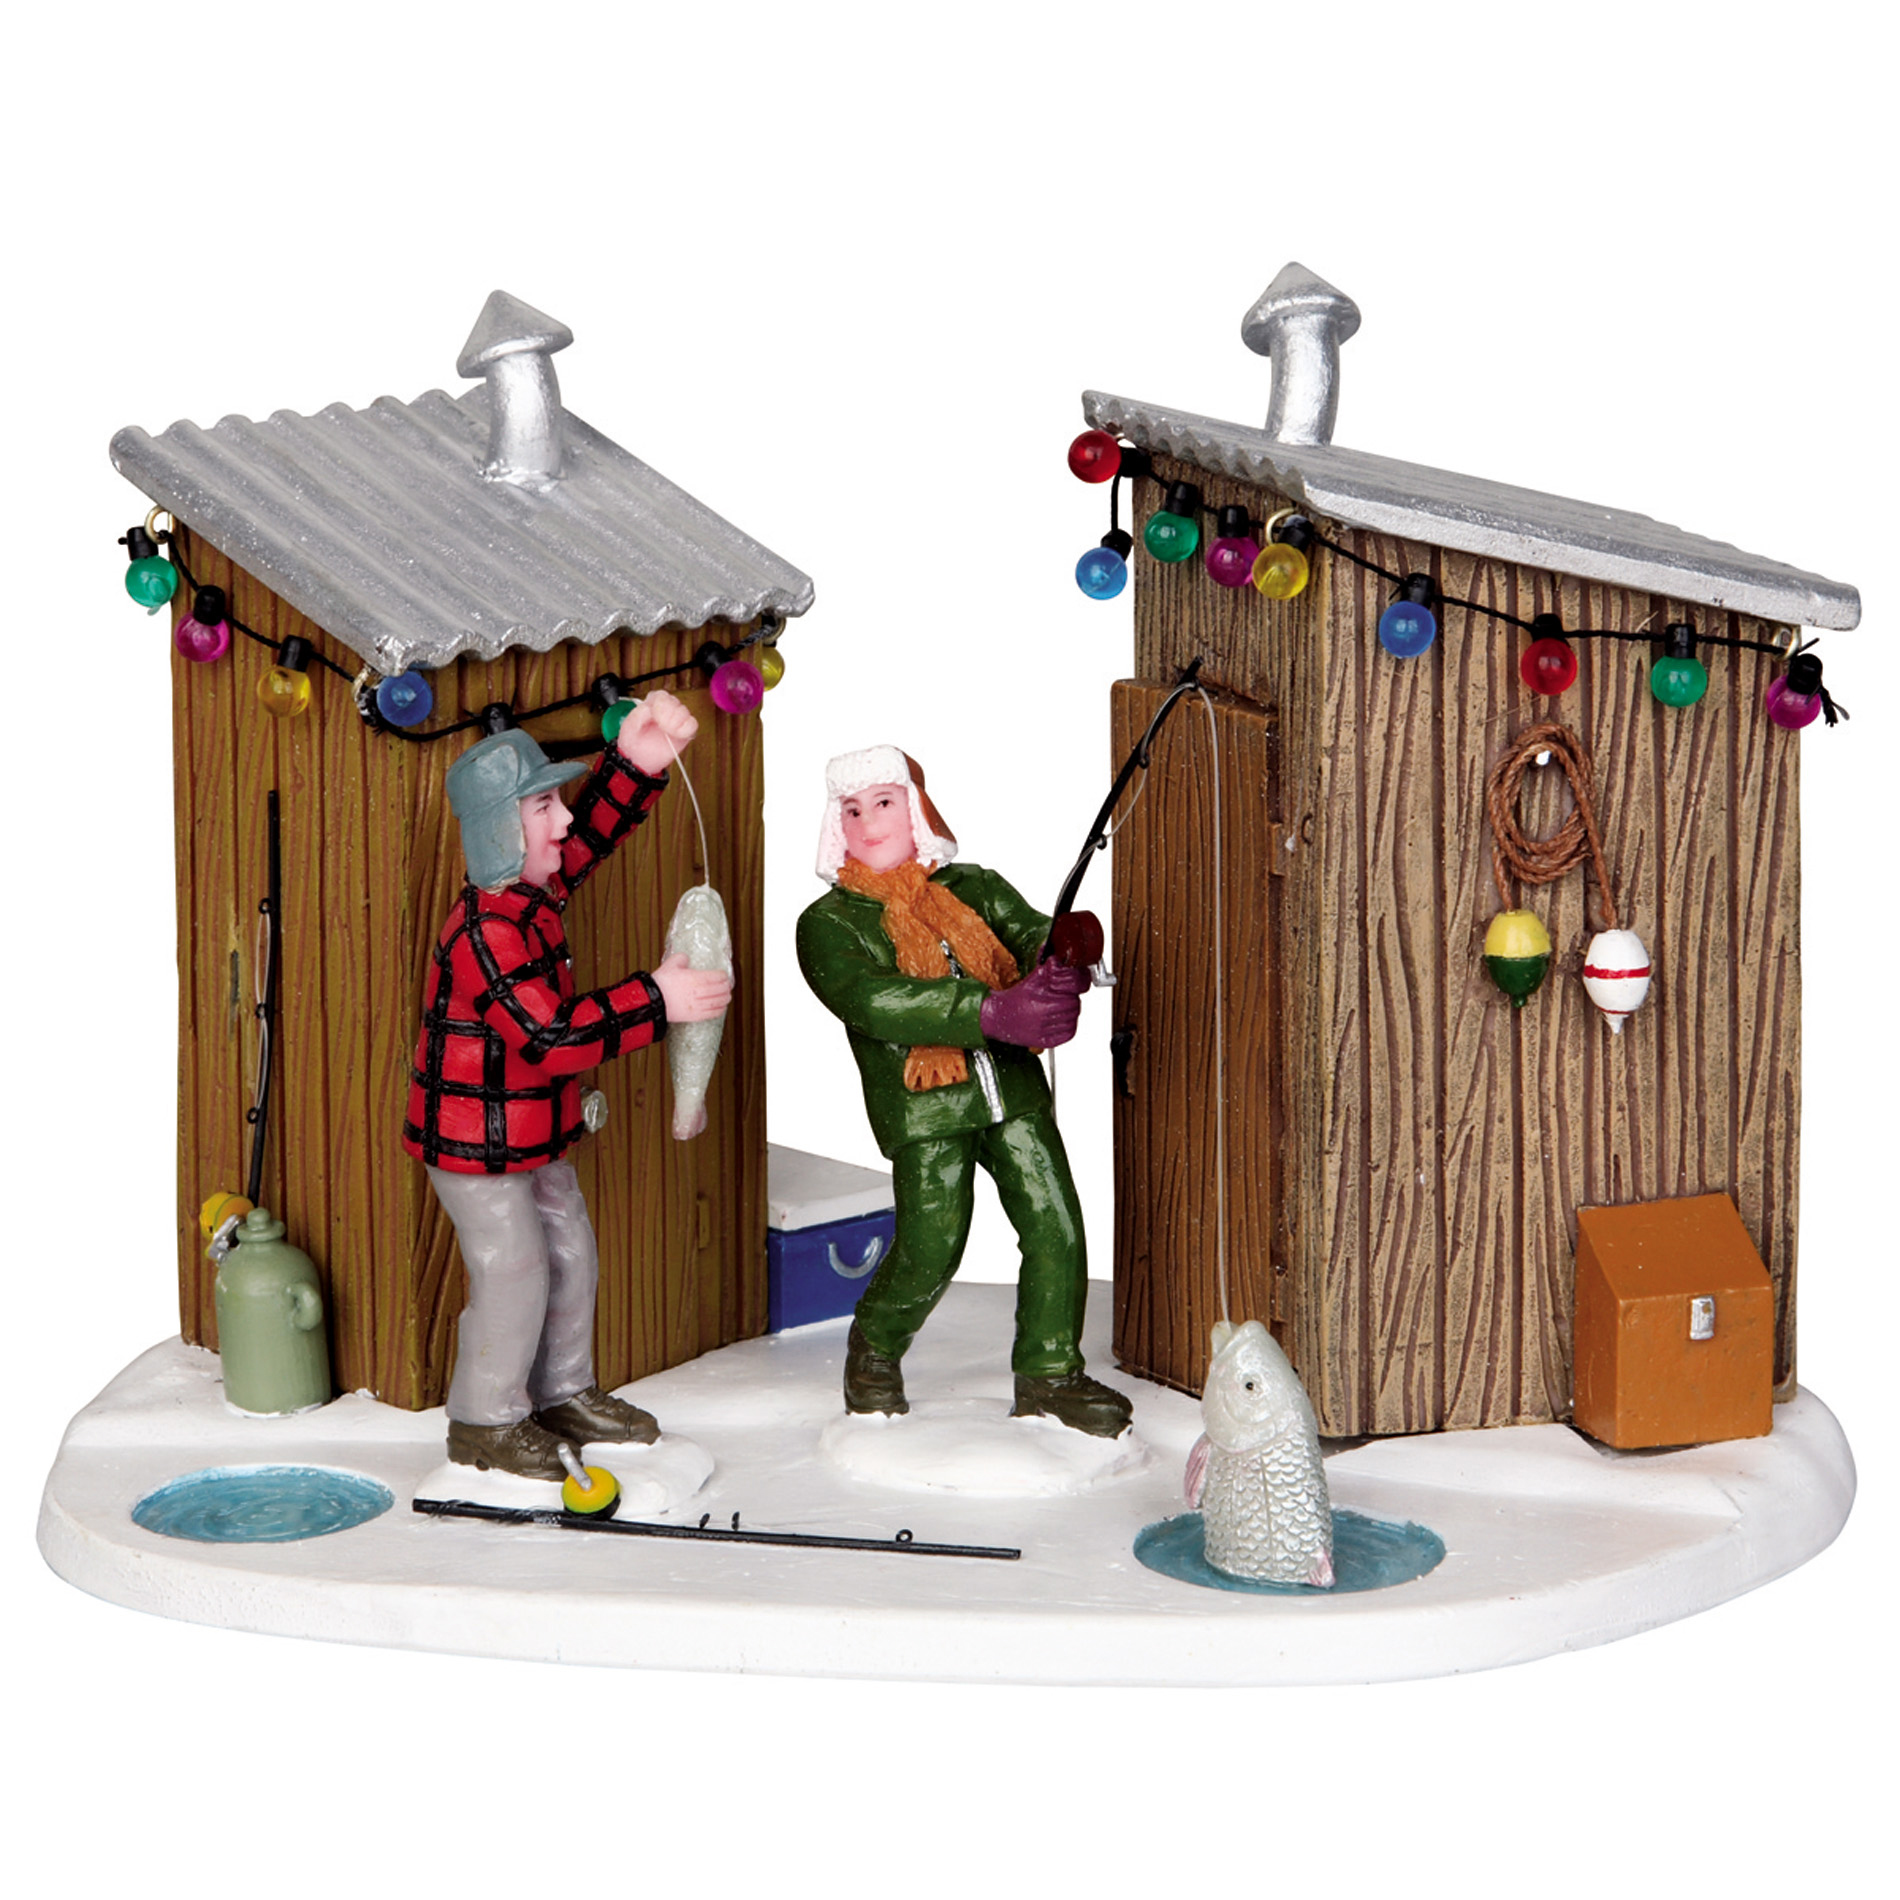 Lemax Friendly Competition Christmas Village Accessory